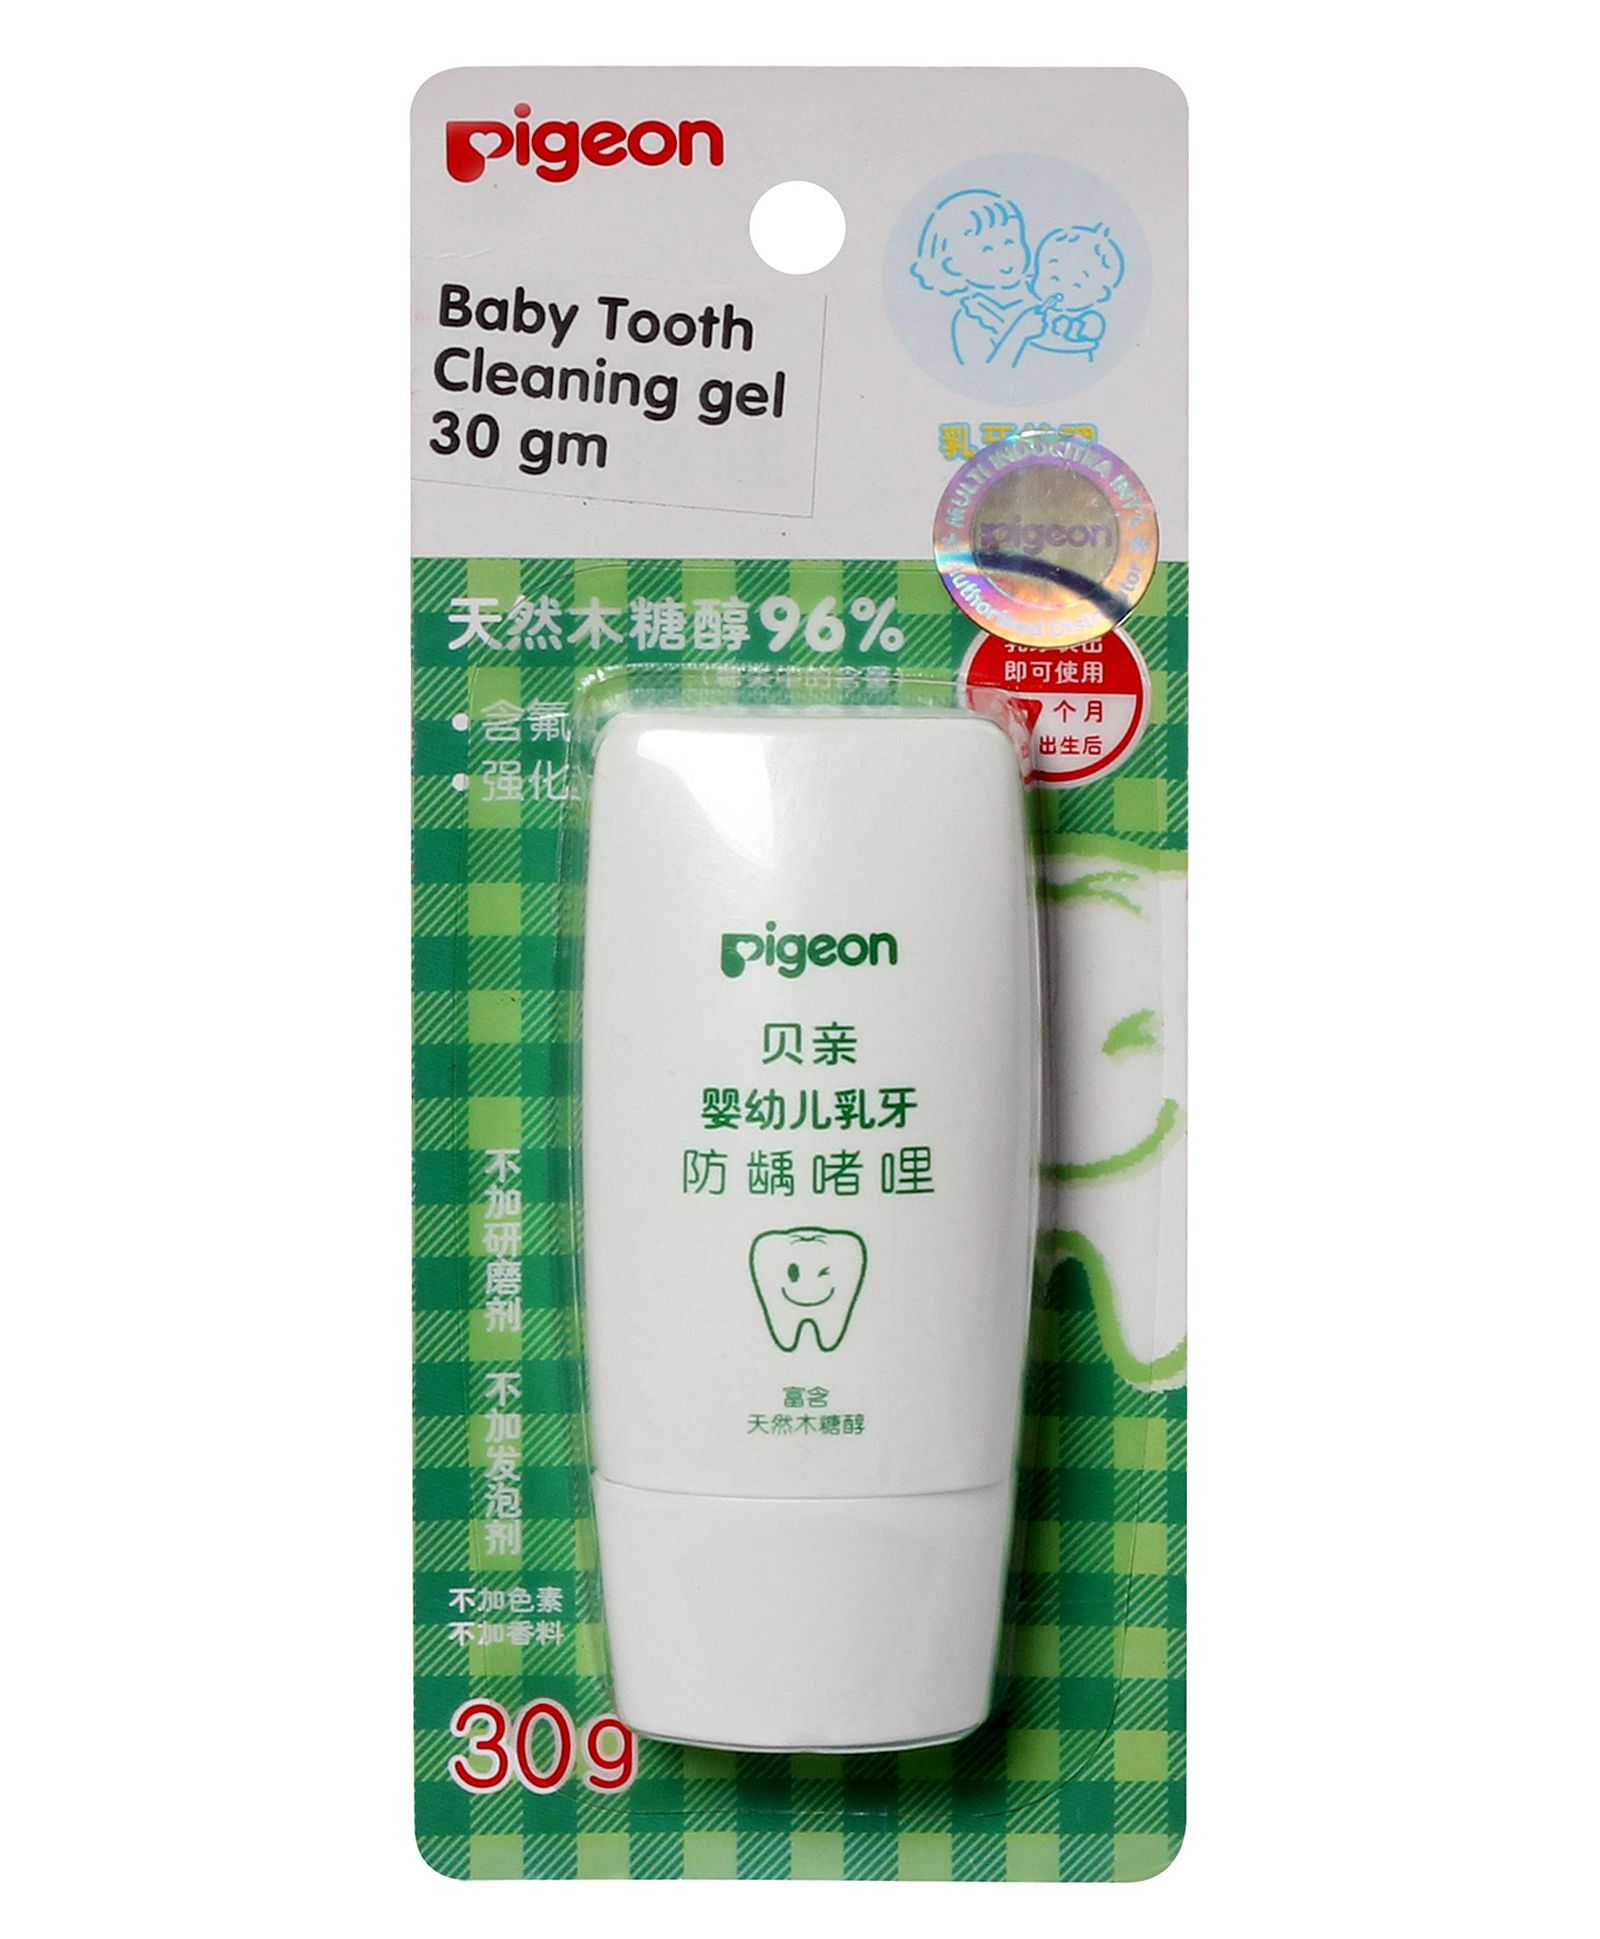 Pigeon - Baby Tooth Cleaning Gel